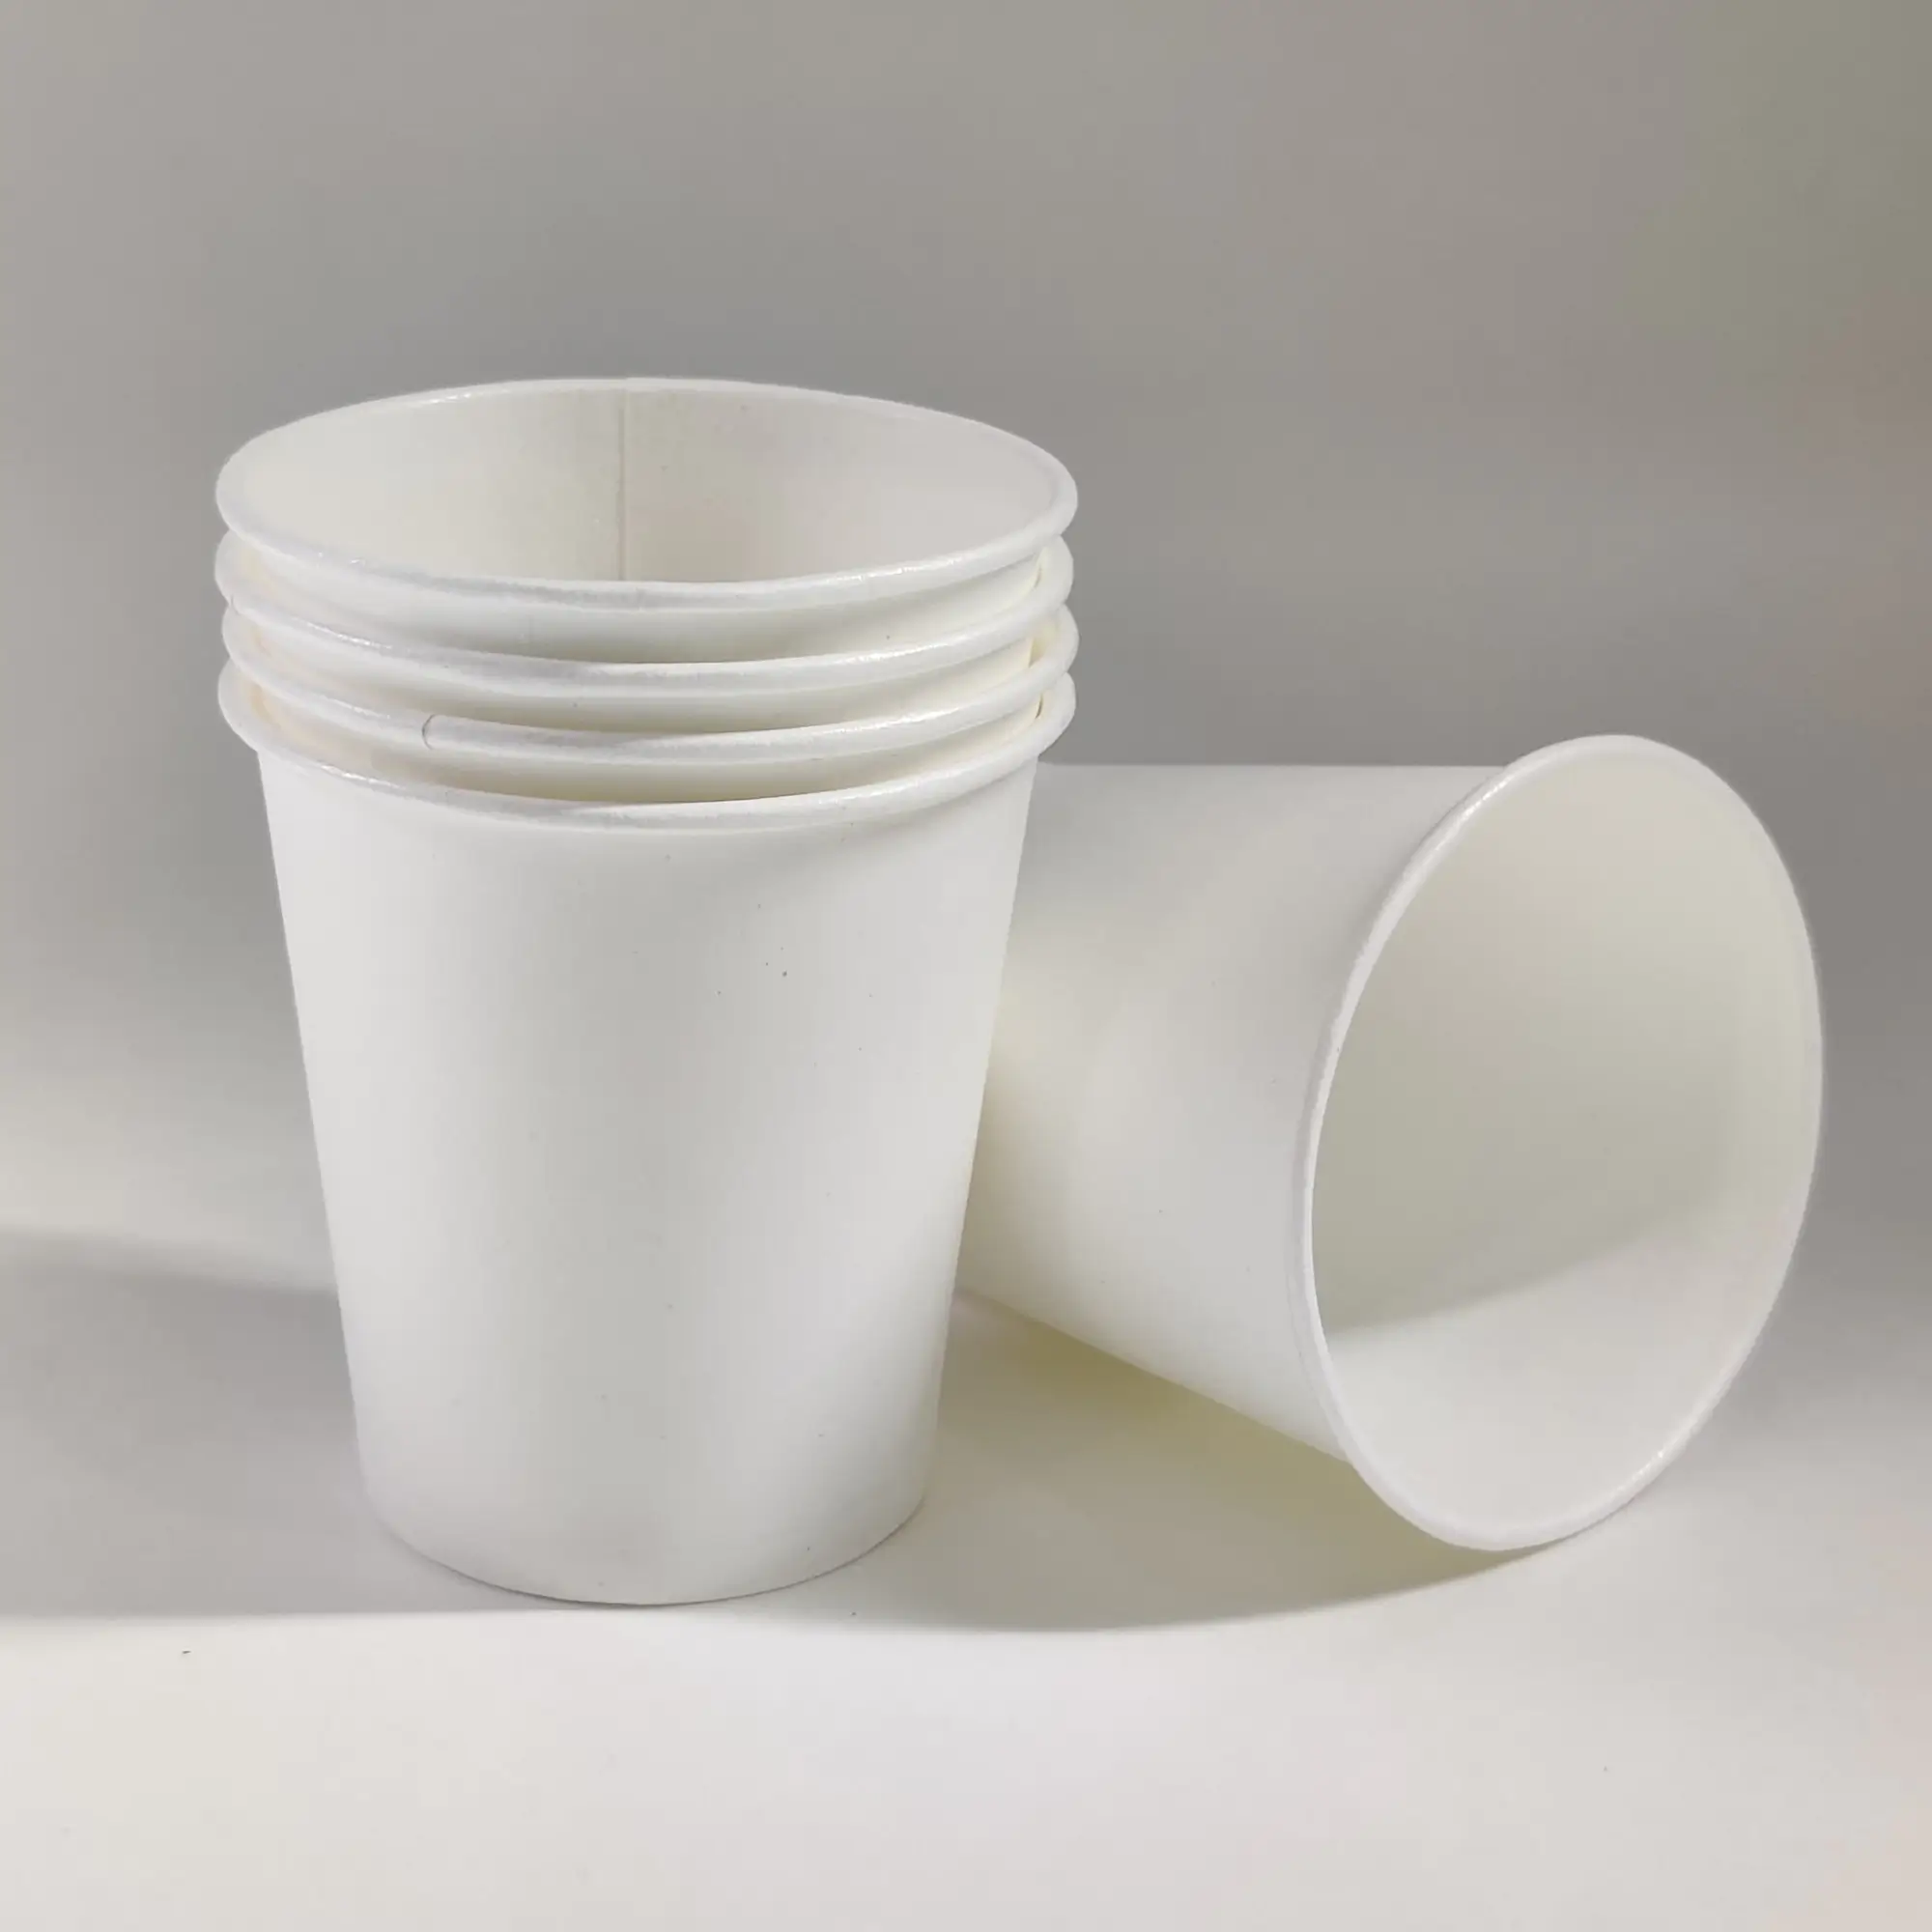 White disposable cups